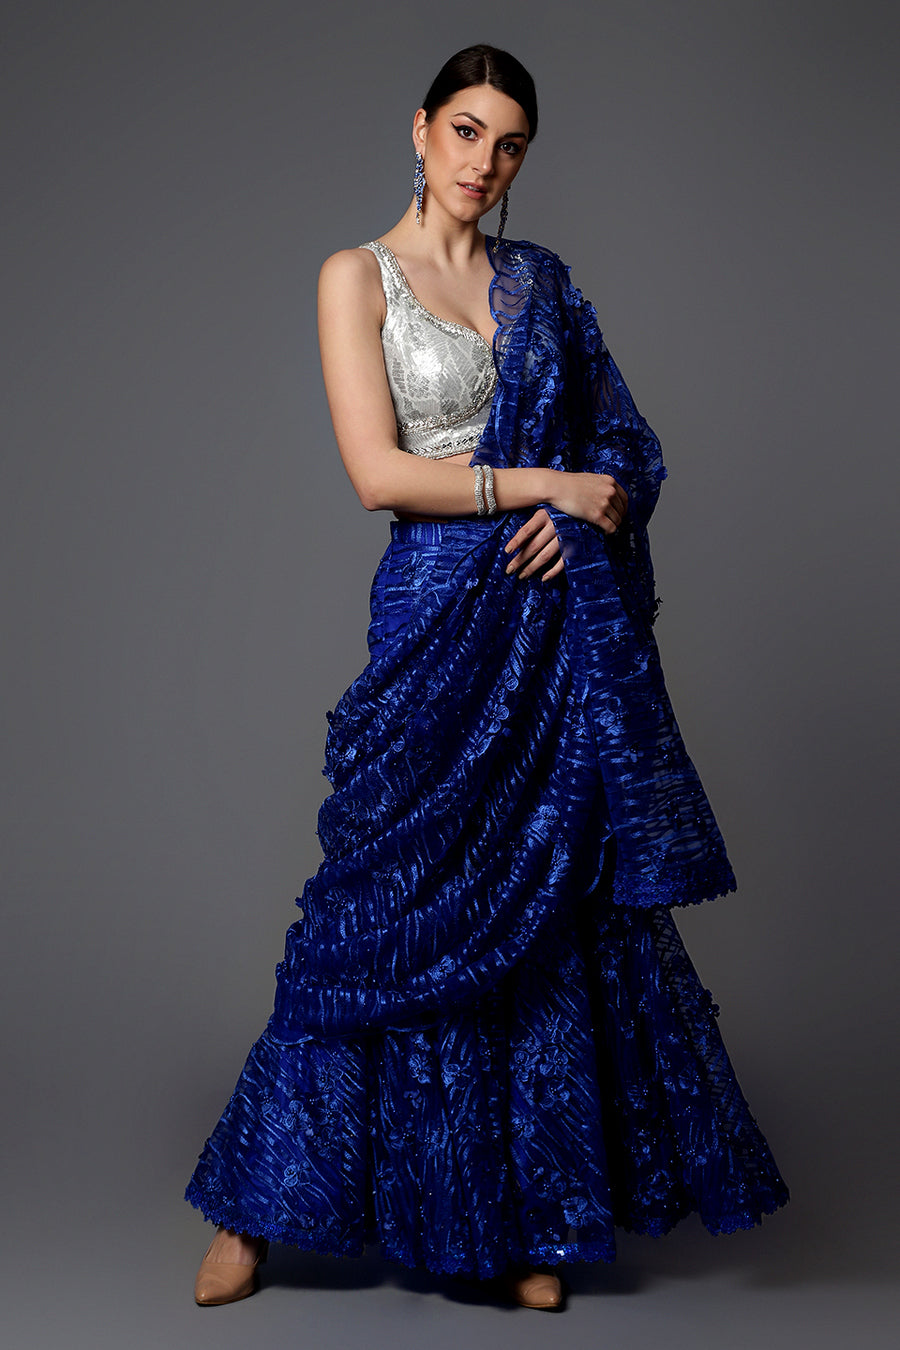 Ninecolours.com - Induce An Aura Of High-Fashion Glamour While Keeping The  Traditions At Bay In This One-Of-A-Kind Double Pallu Style Lehenga Saree  Embellished With Ribbon Embroidery Details. Drape them for Functions and